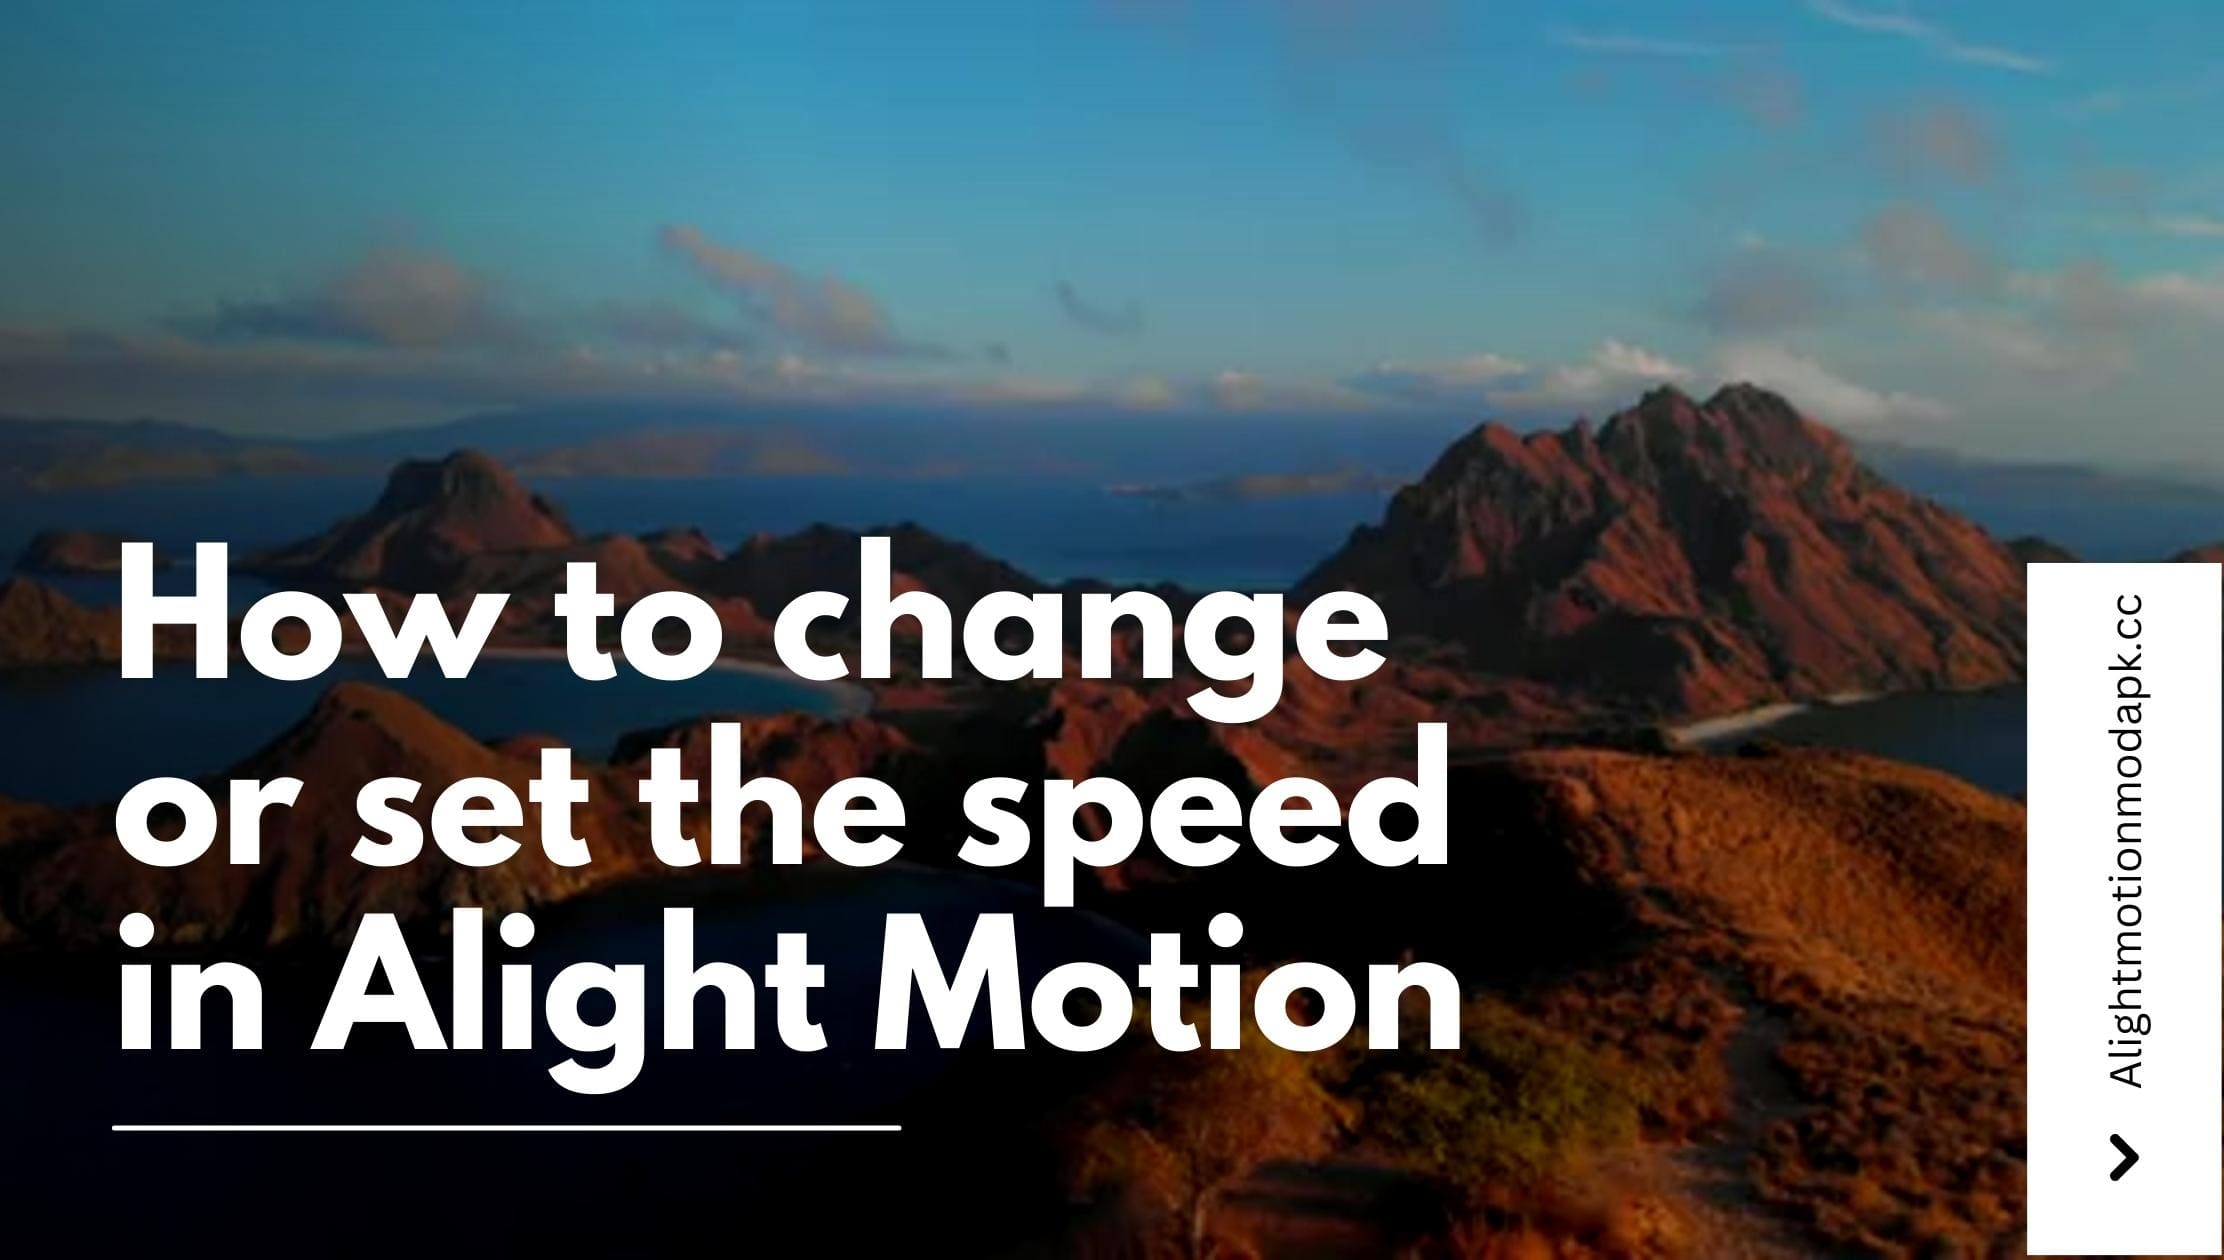 How to change or set the speed in Alight Motion